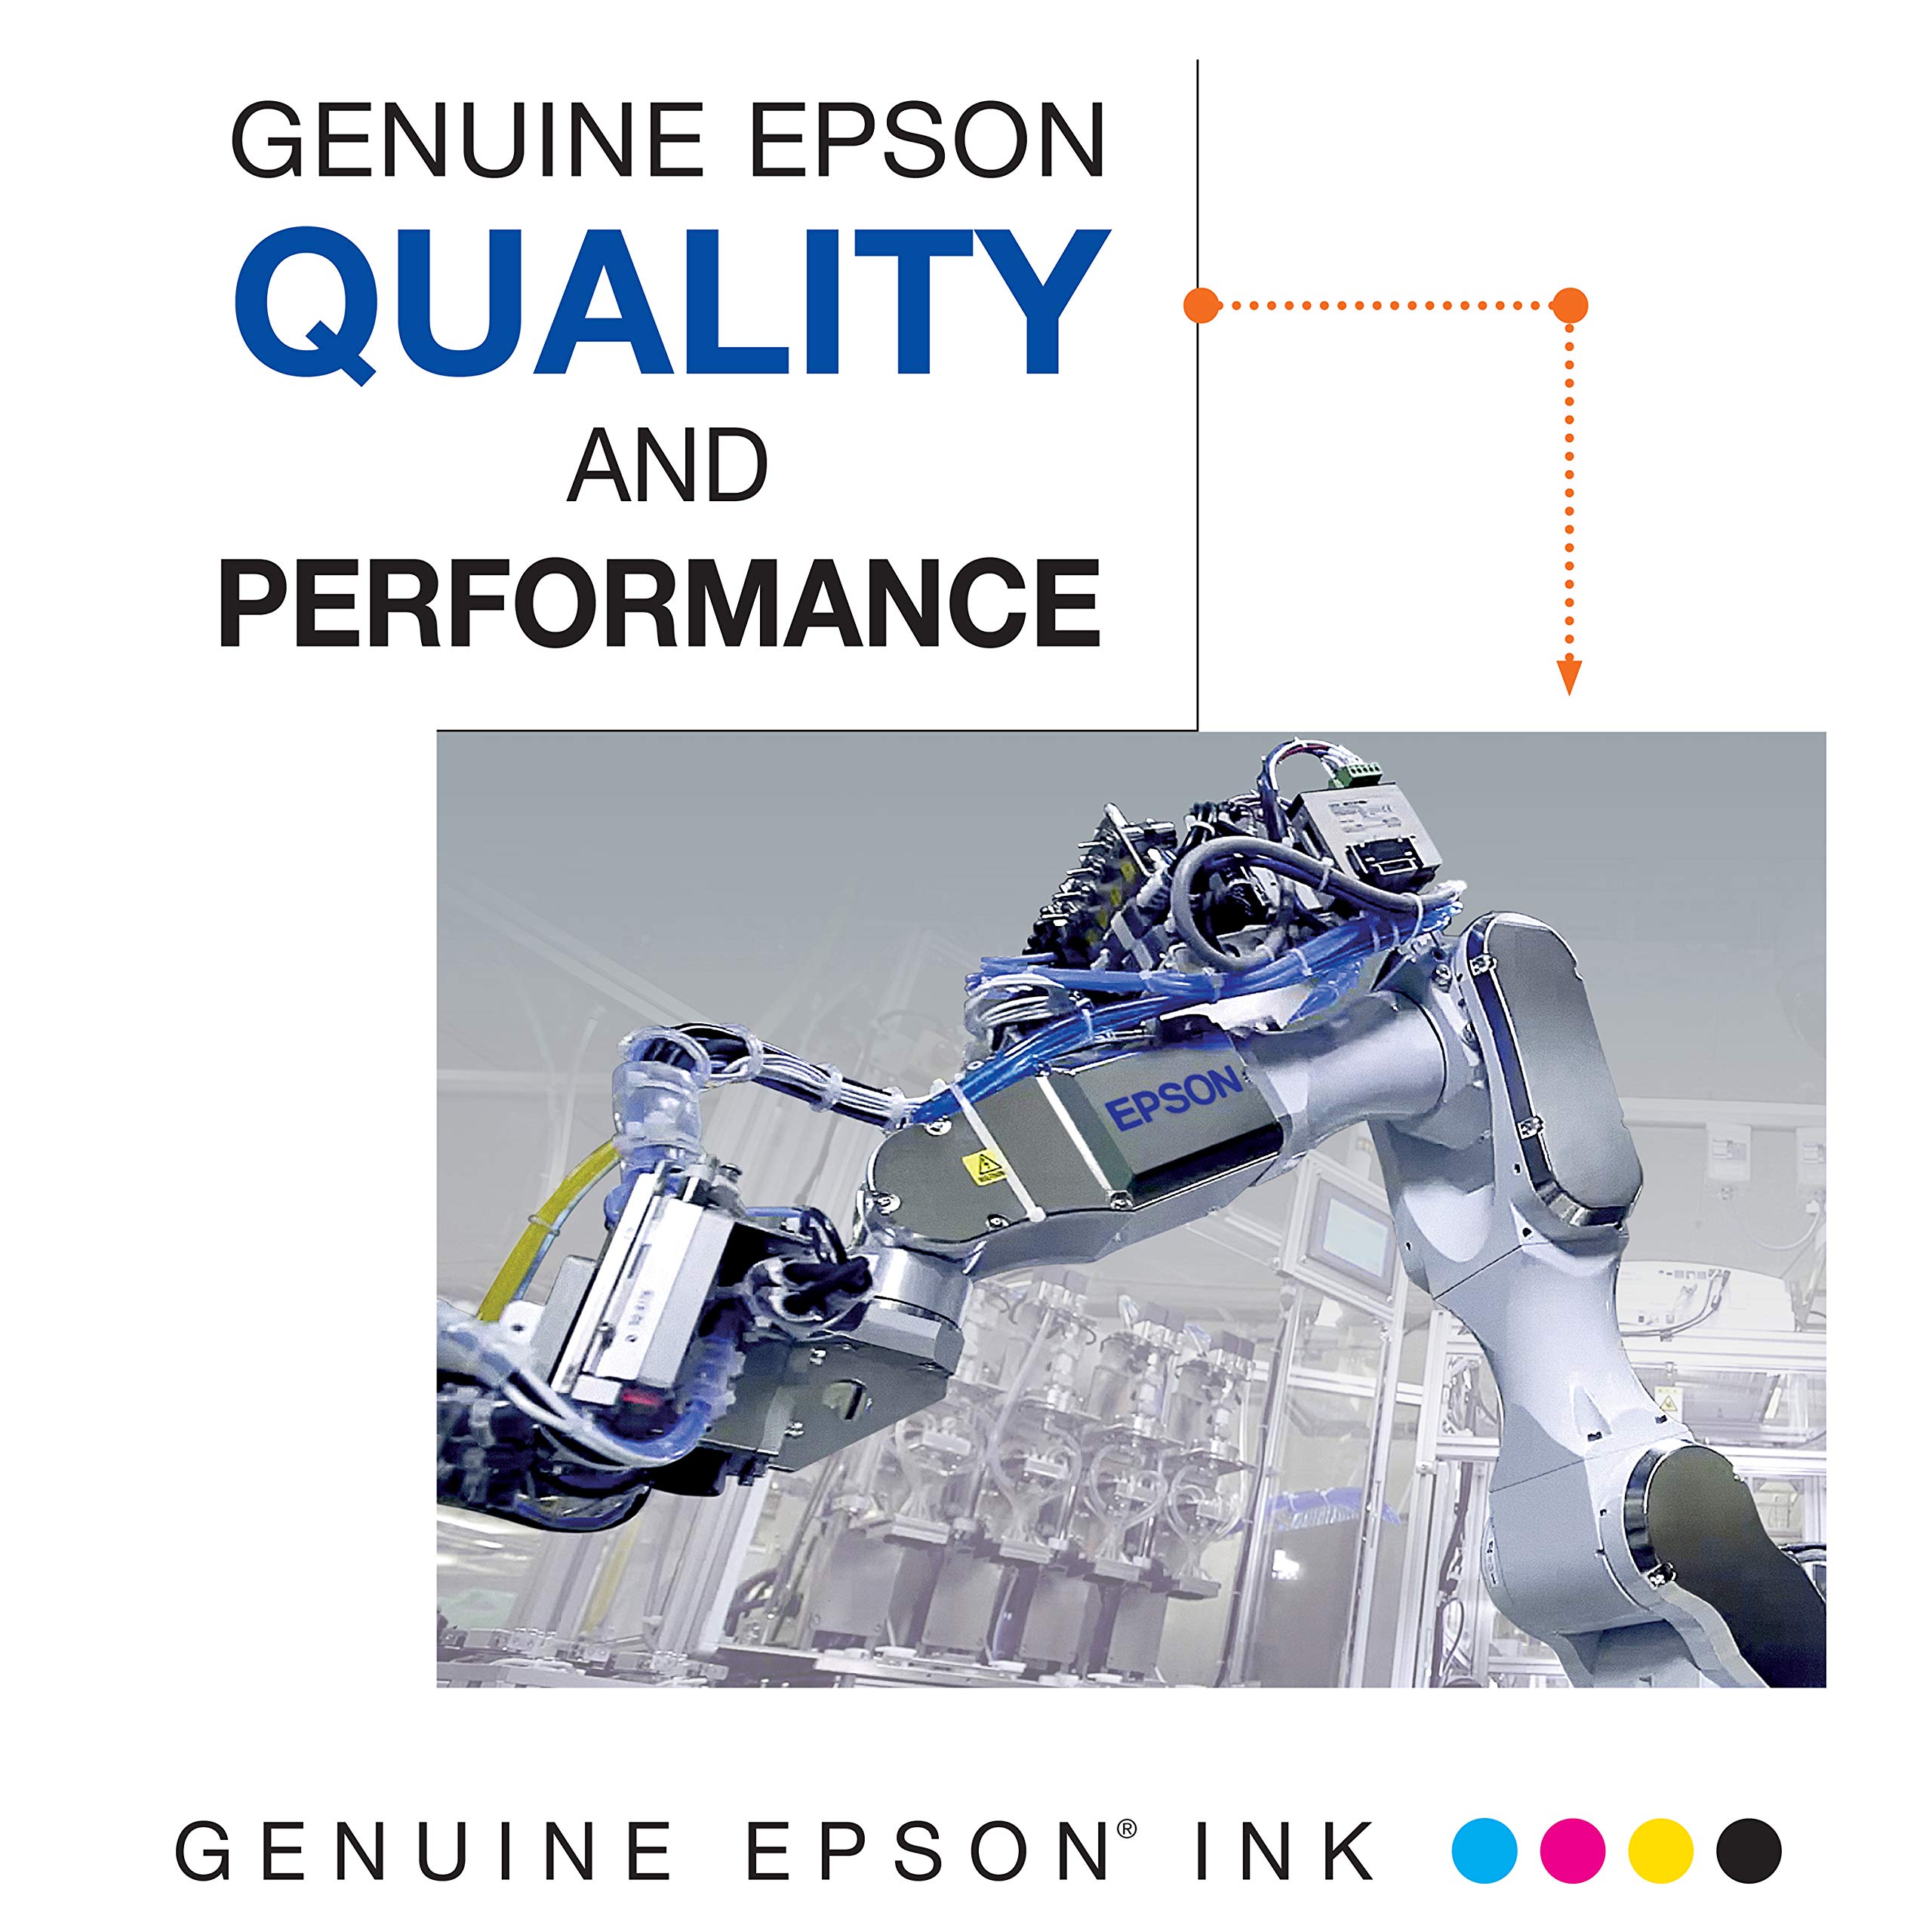 EPSON T302 Claria Premium -Ink High-capacity Black and Standard-capacity Photo Black and Color-Cartridge Combo Pack (T302XL-BCS) for select Epson Expression Premium Printers